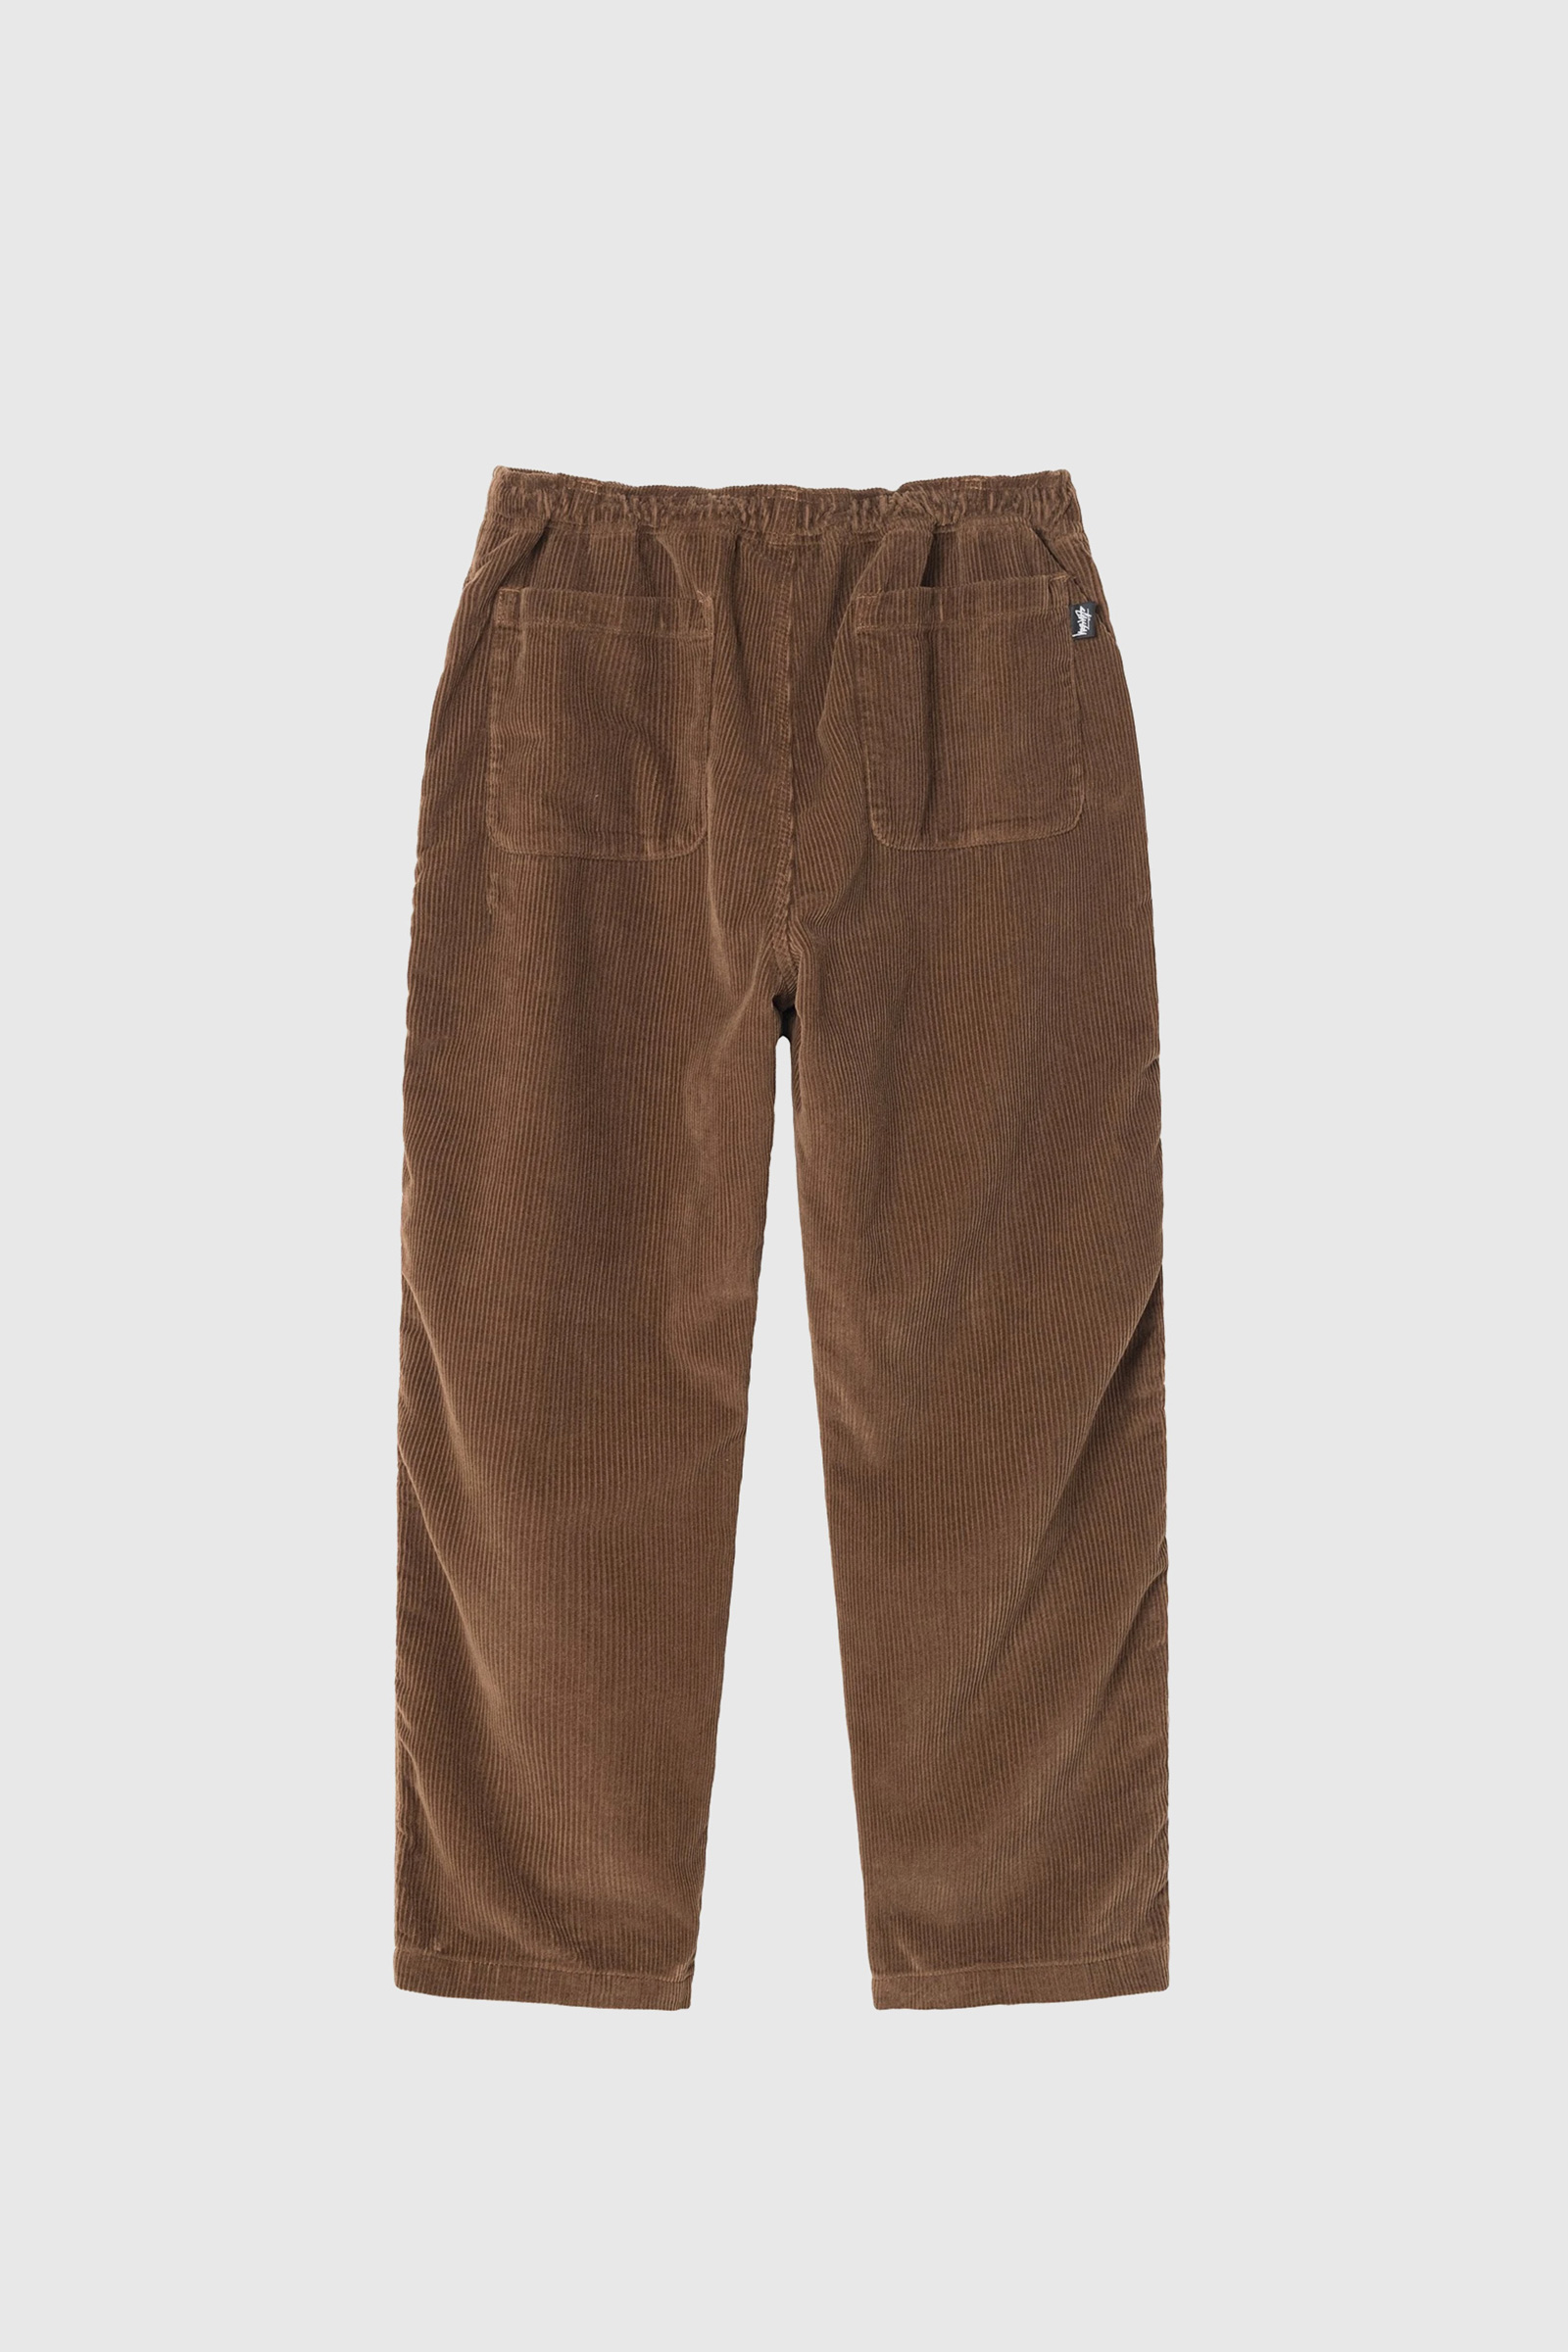 Stüssy Corduroy Relaxed Pant Brown